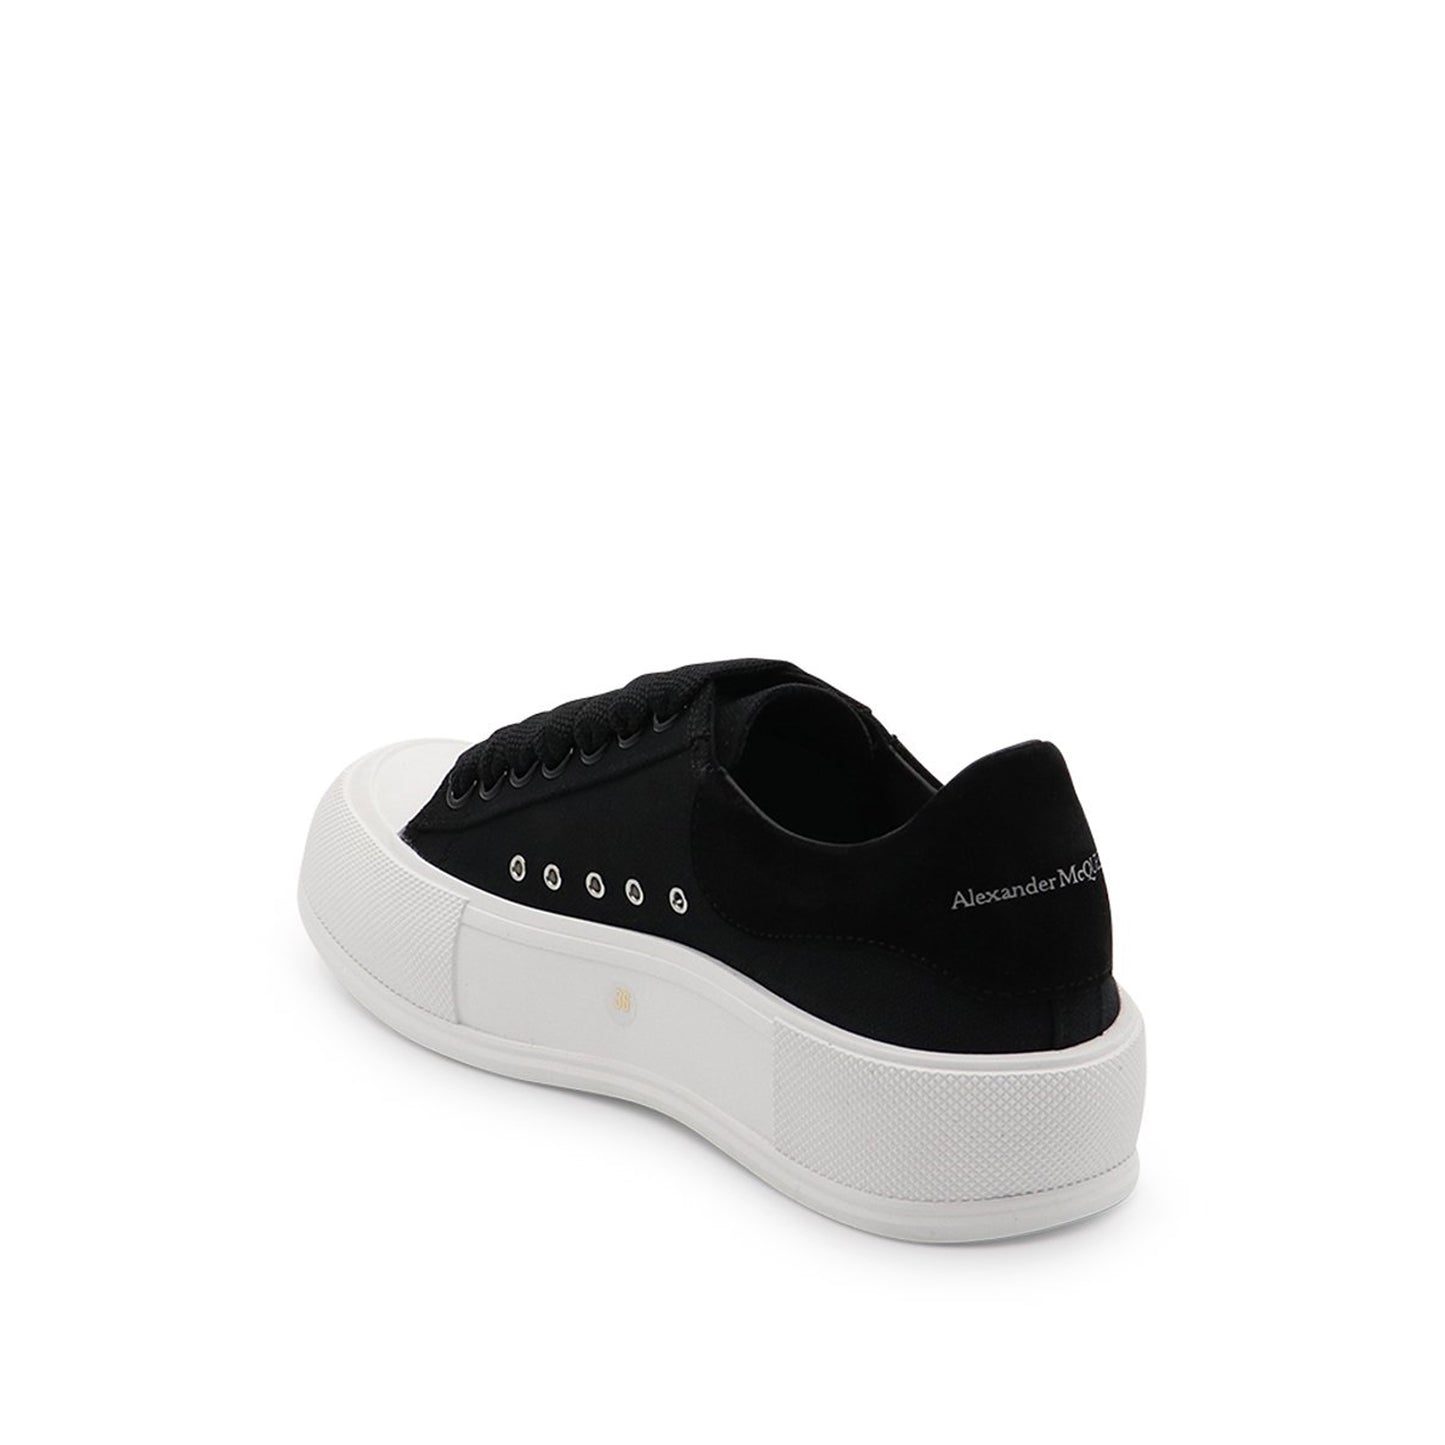 Lace Up Plimsoll Canvas Sneaker in Black